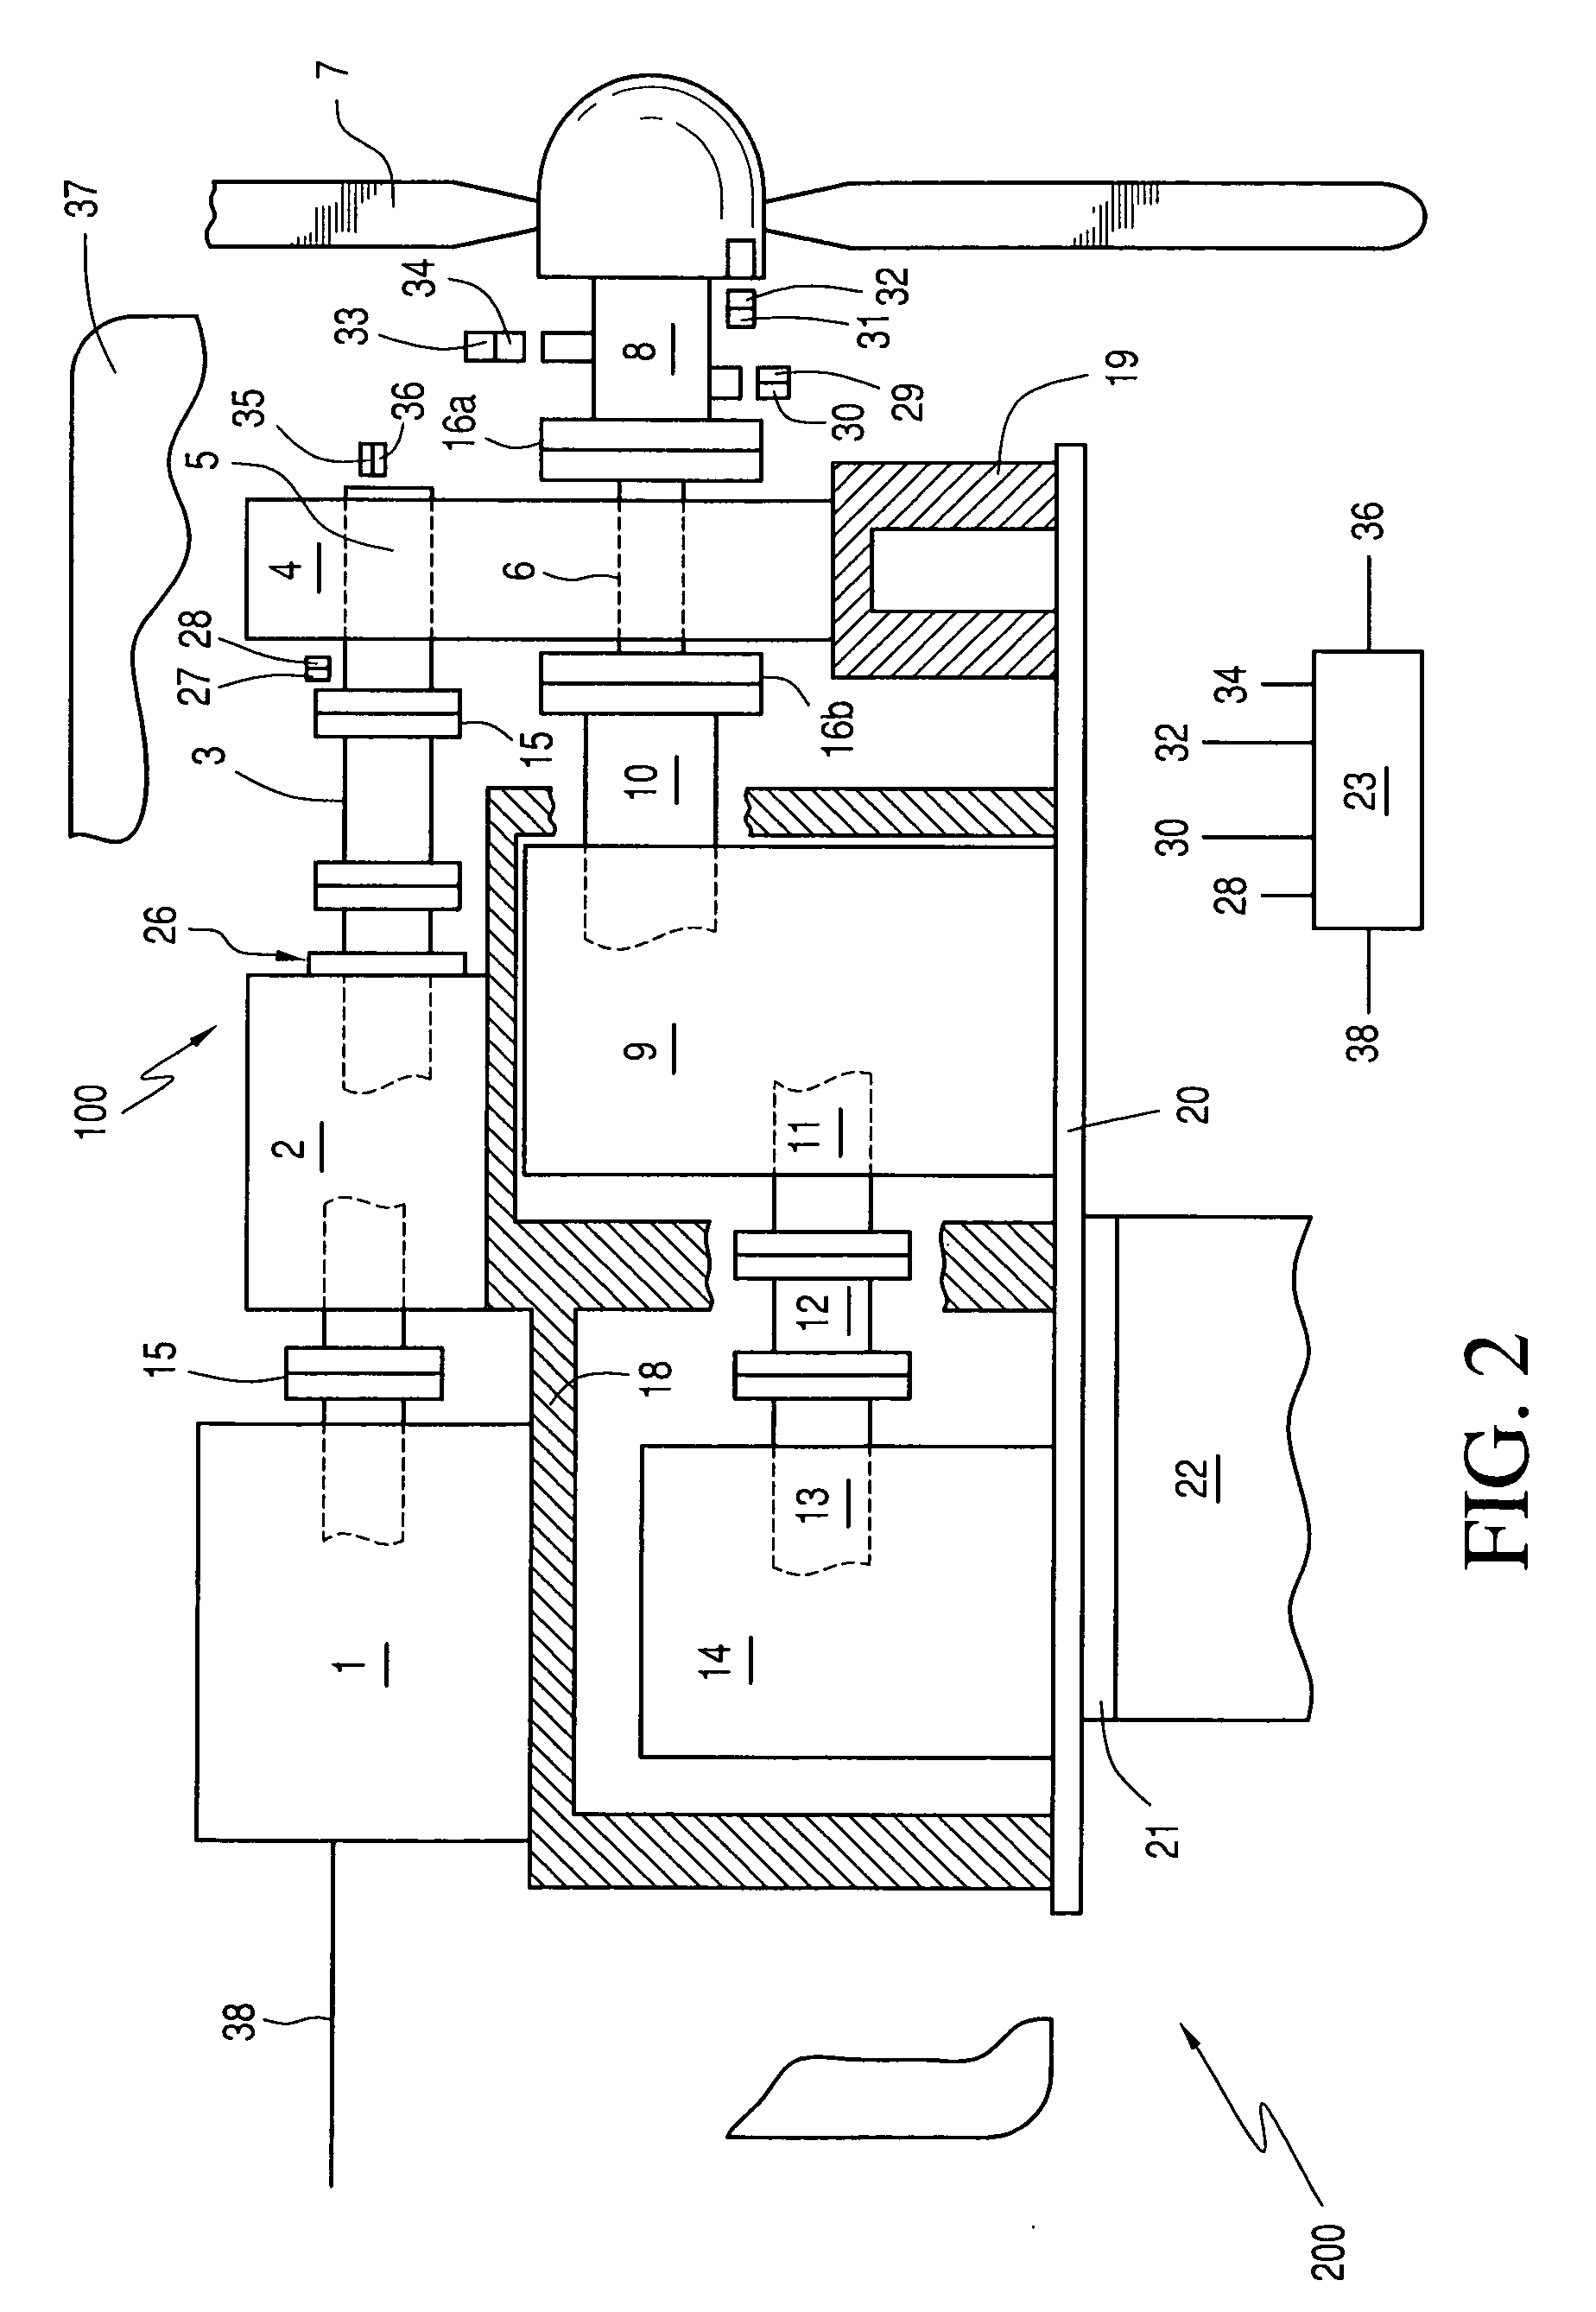 Auxiliary drive/brake system for a wind turbine